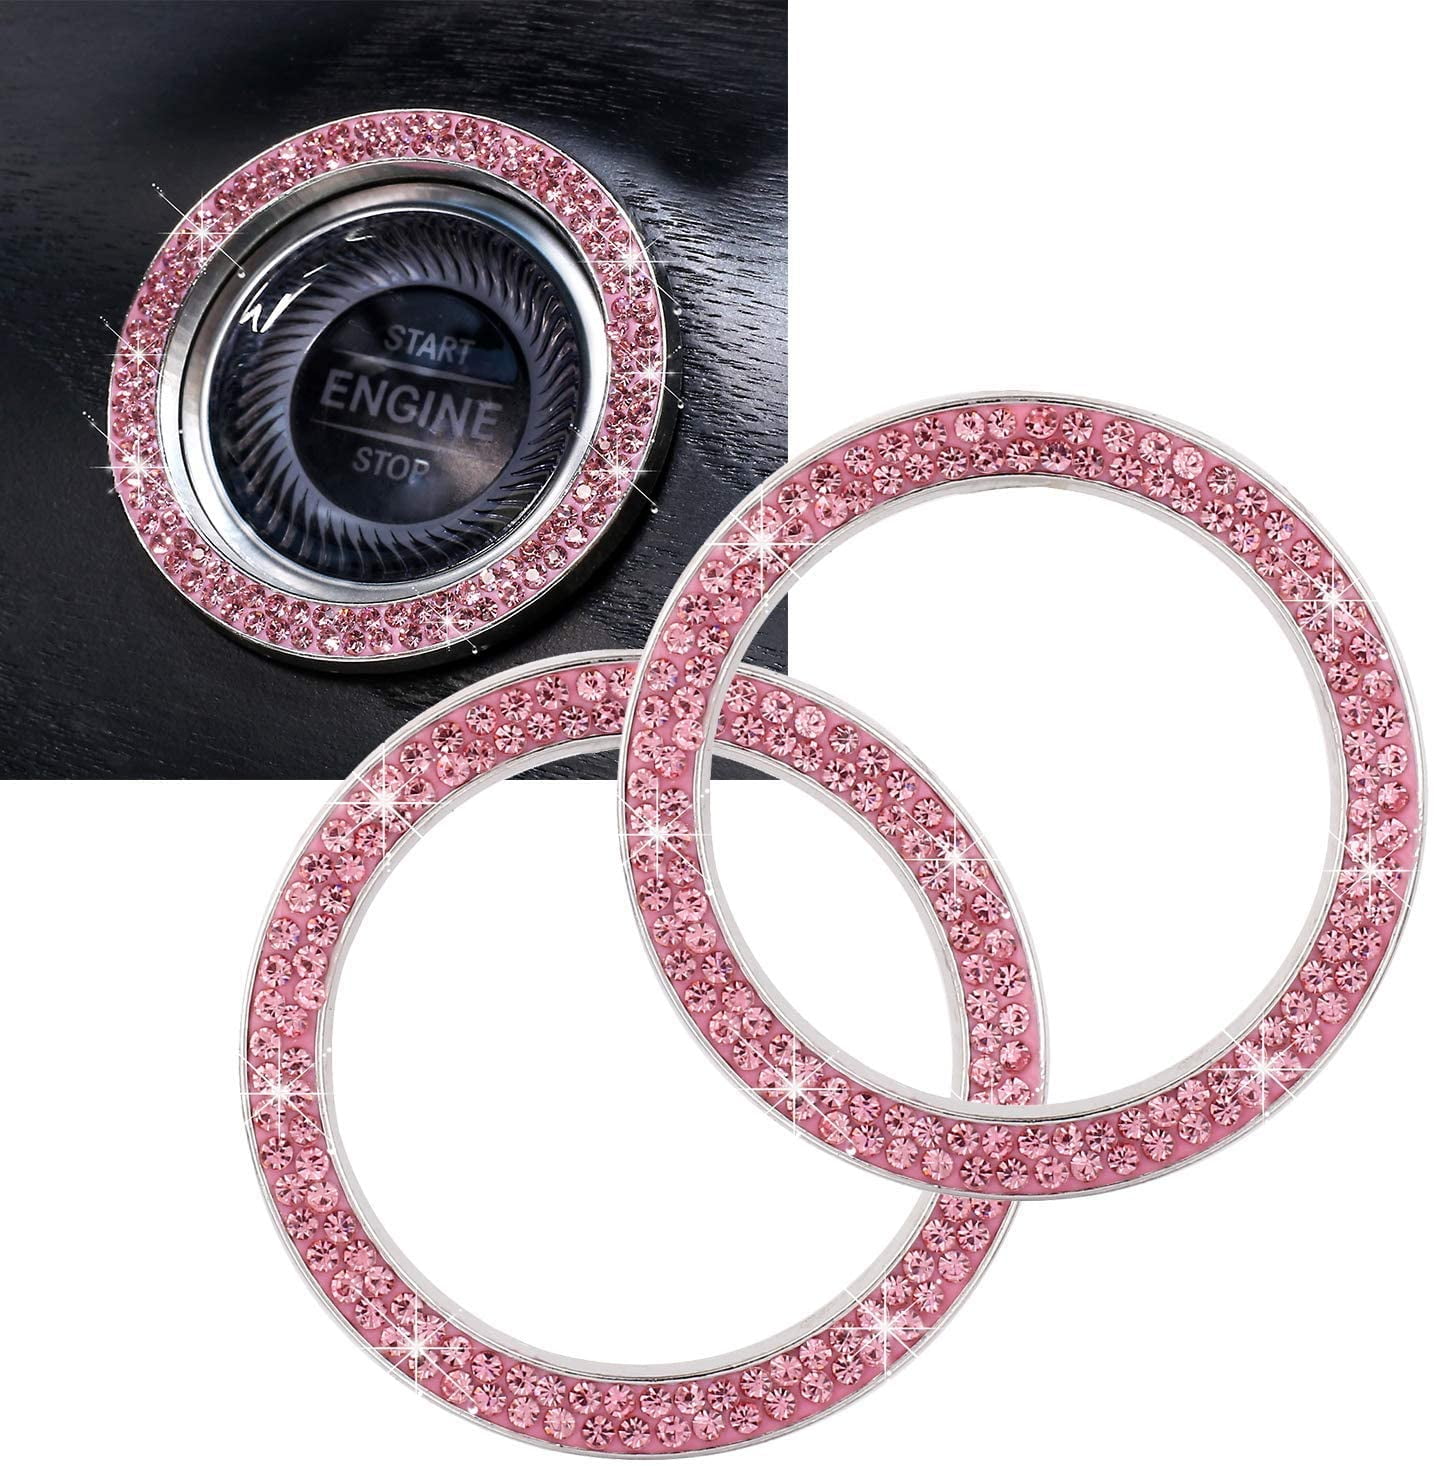 Bling Car Engine Start Stop Button Cover Bling Crystal Rhinestone Car Push to Start Accessories Cute Car Accessories for Women Pink Car Decals for Women Girly Car Decoration Interior Sticker 